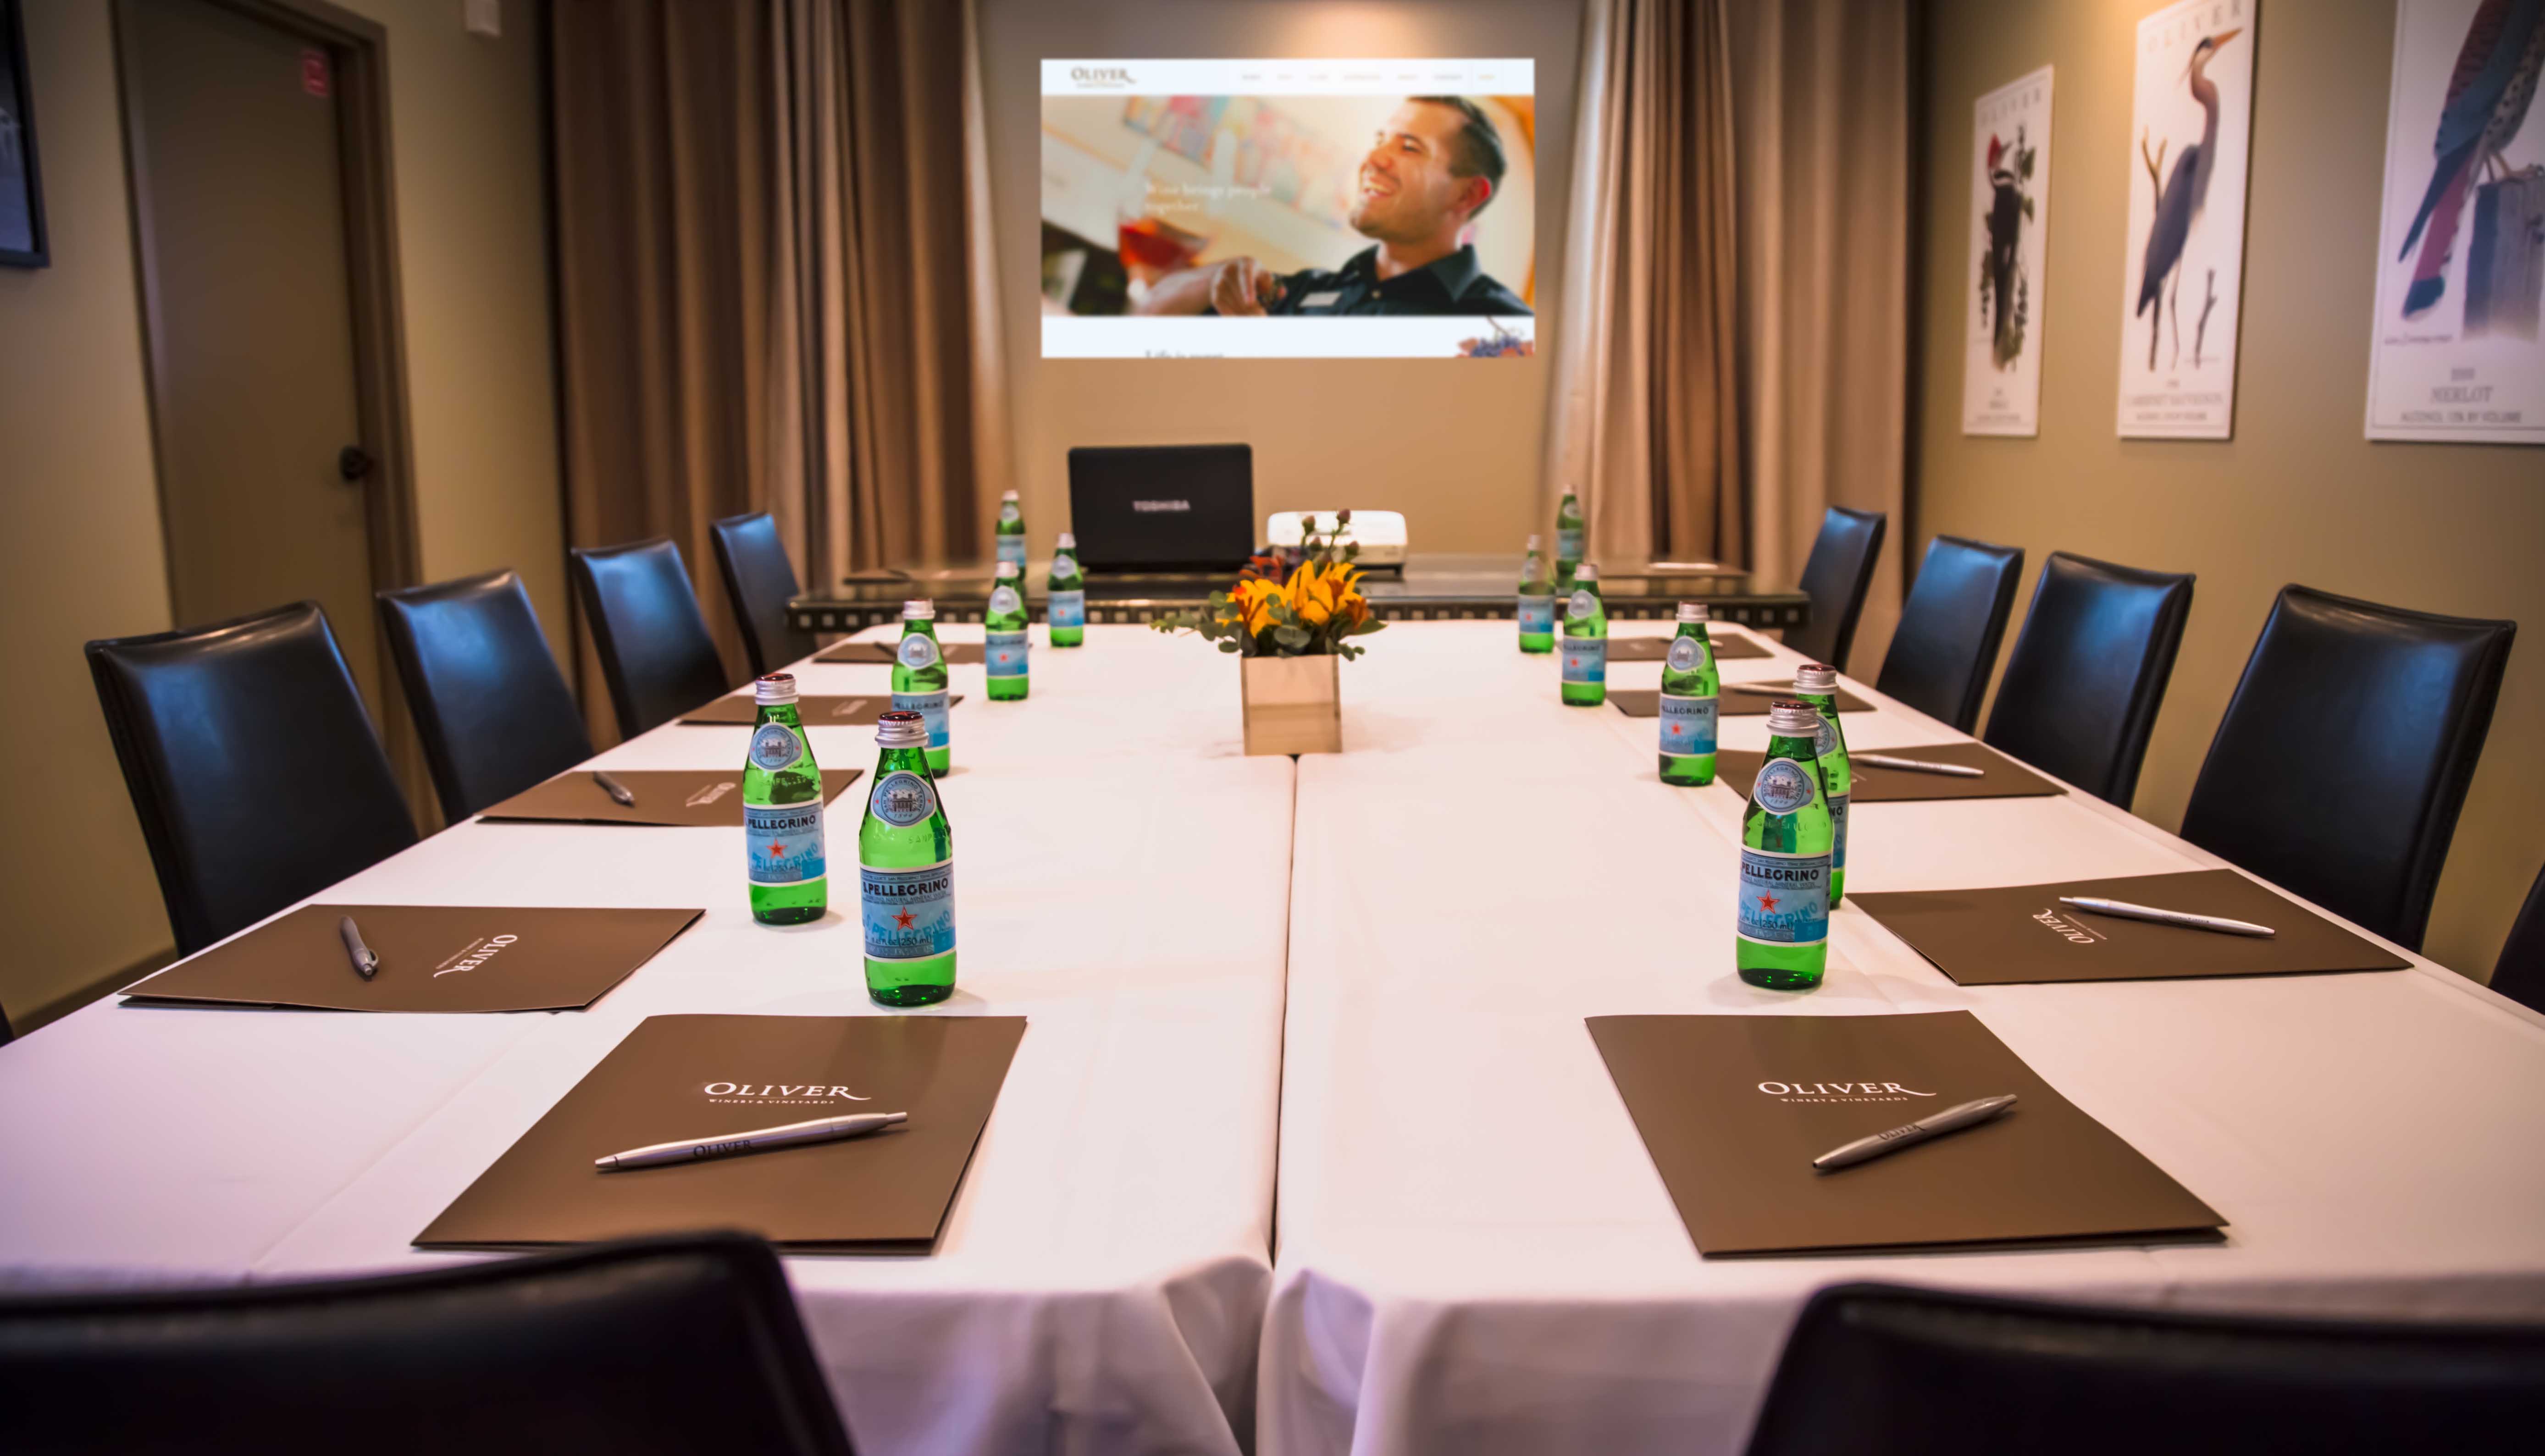 A great option for corporate meetings.